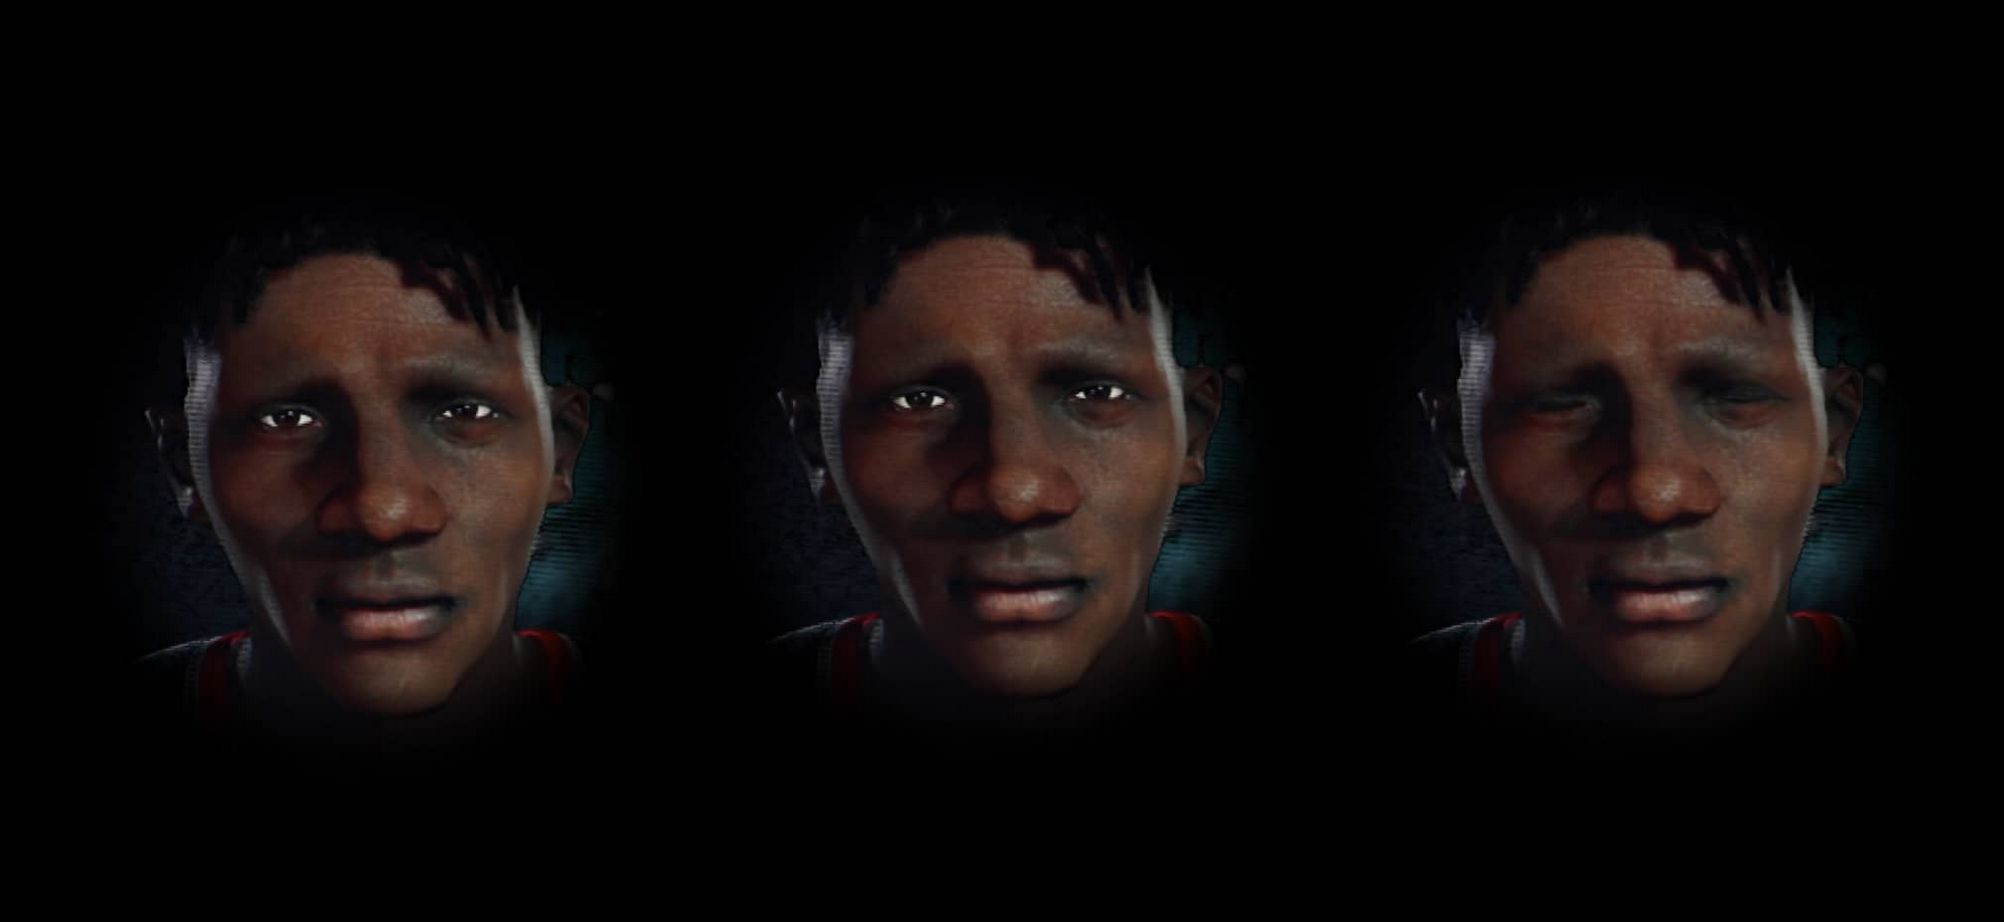 video still of three faces of a black man with a pensive stare